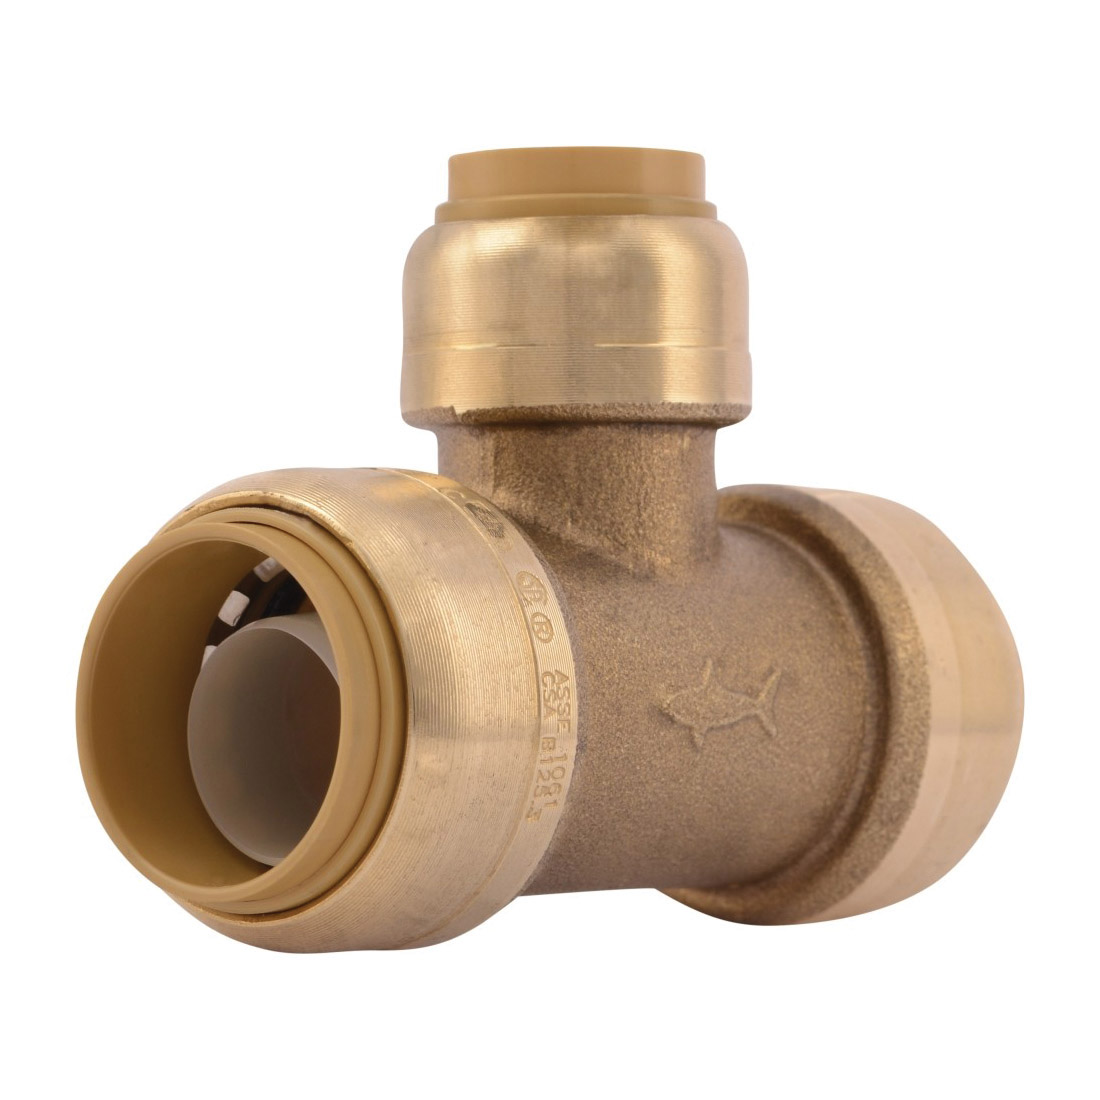 Sharkbite® U412LF Pipe Reducing Tee, 3/4 x 3/4 x 1/2 in Nominal, Push-Fit End Style, Brass, Import